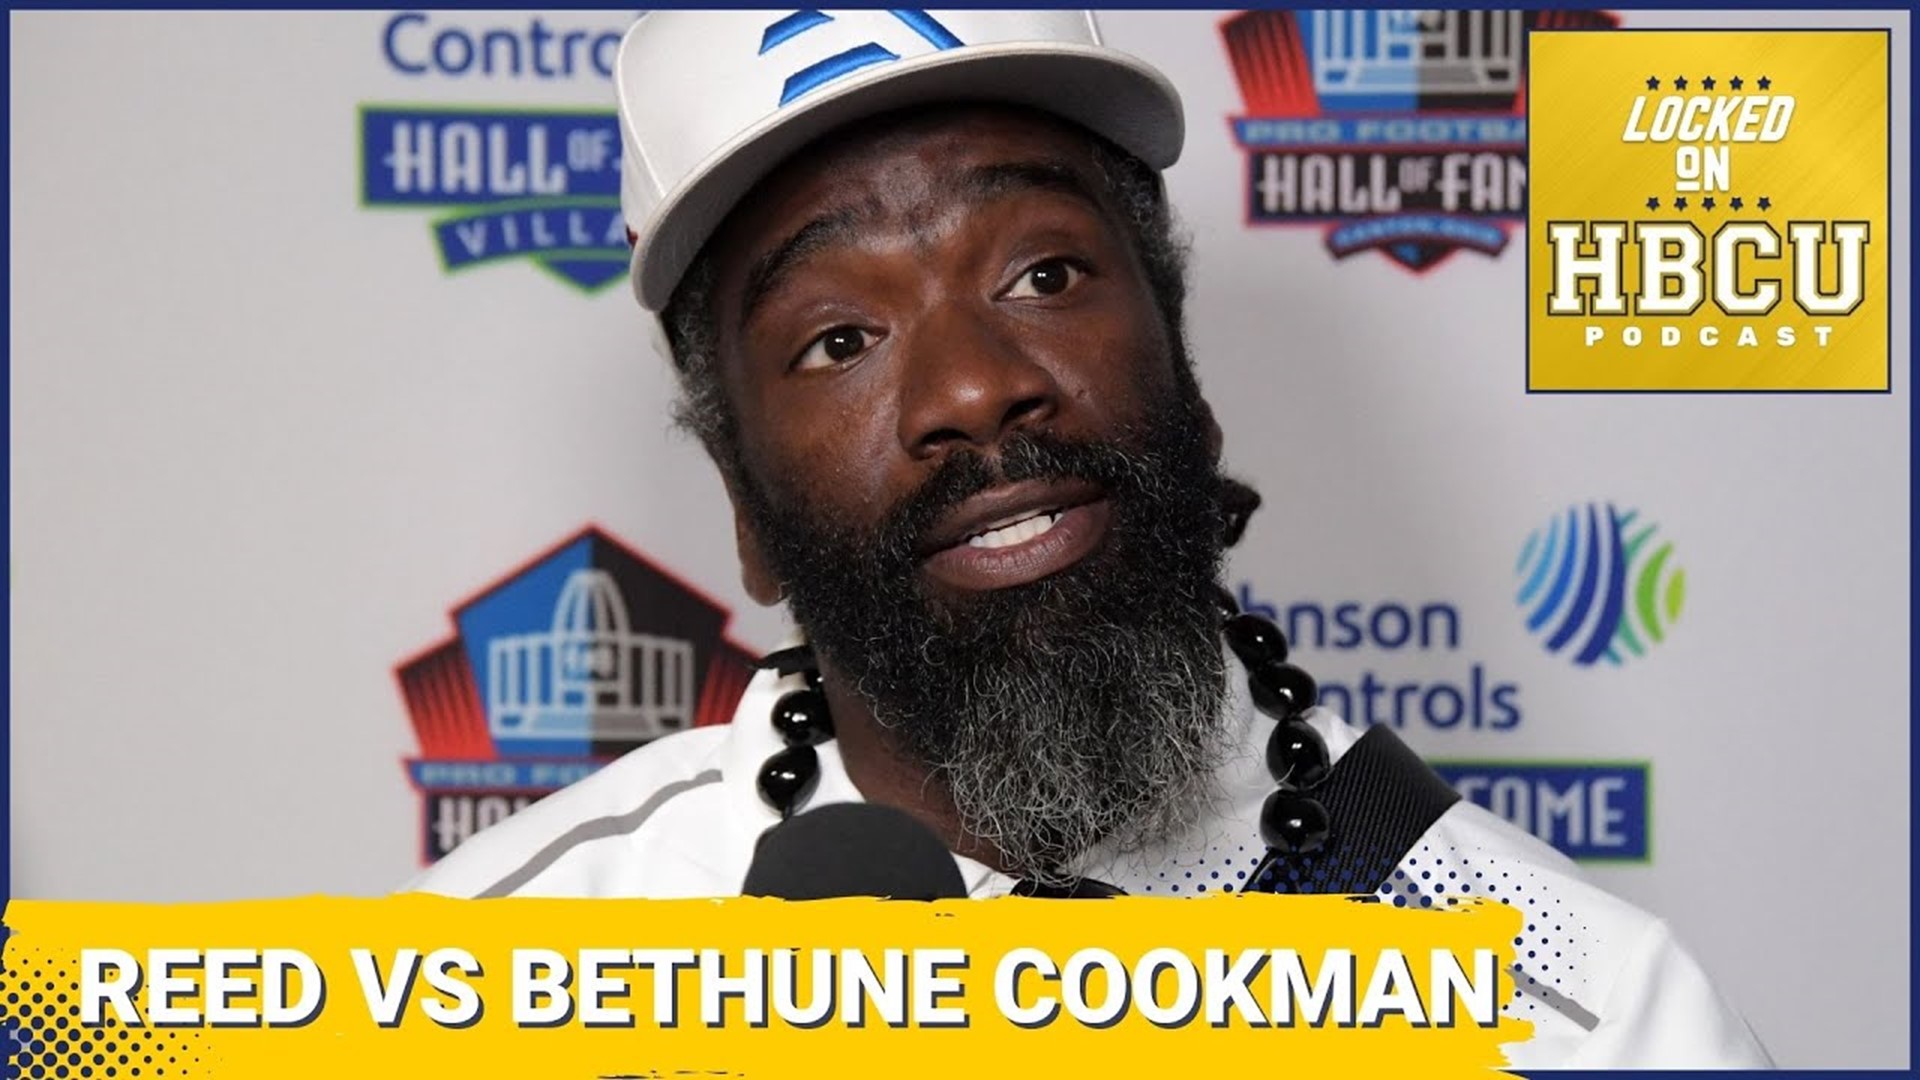 Ed Reed & Bethune Cookman have broken up and it comes down to what you do vs how you do it.